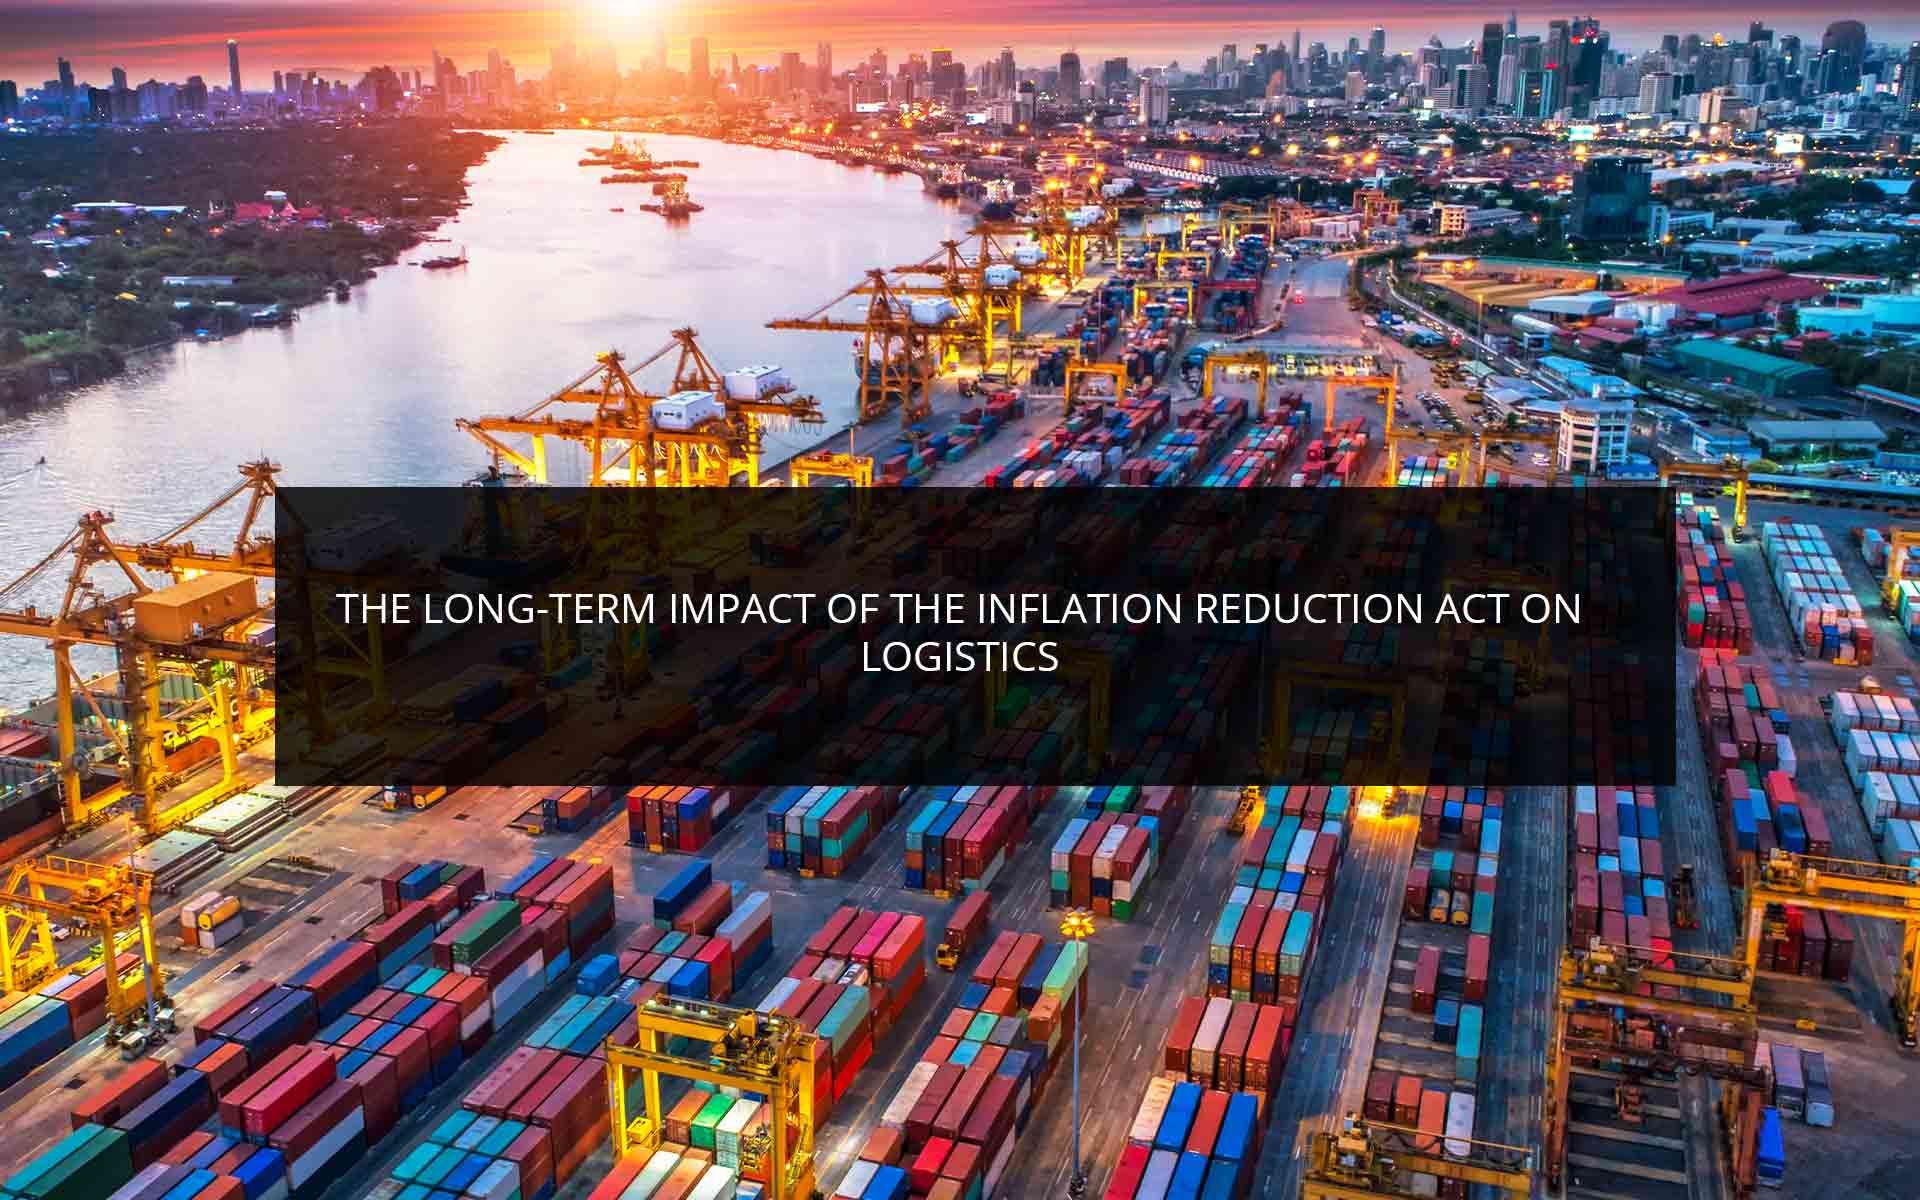 3 Effects of the Inflation Reduction Act on Logistics